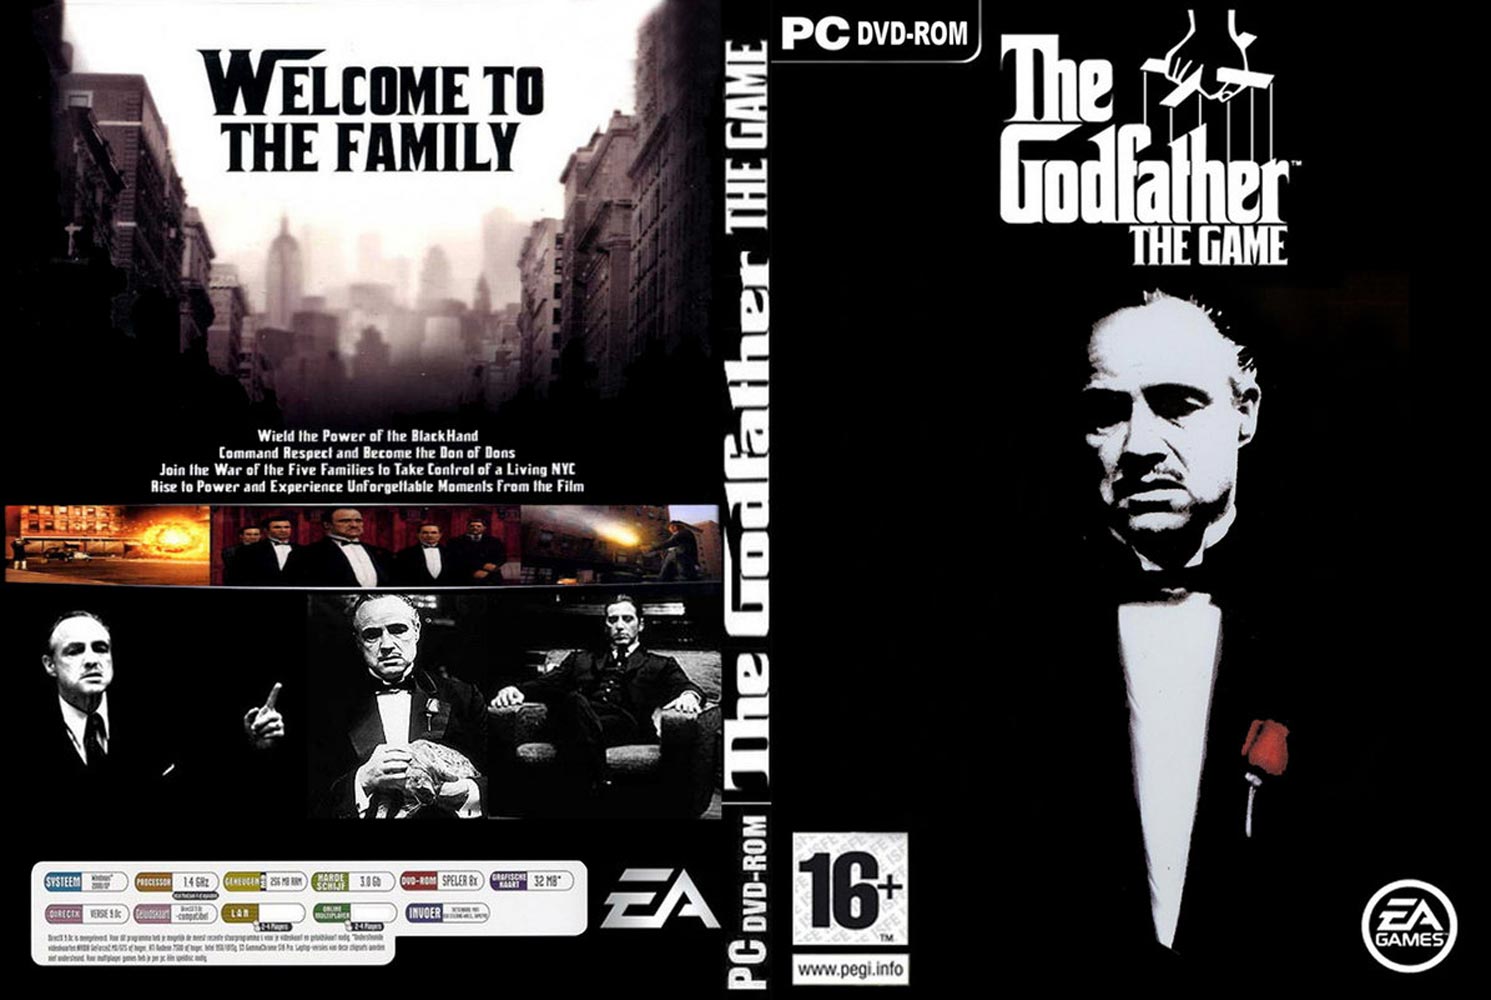 The Godfather - DVD obal 2